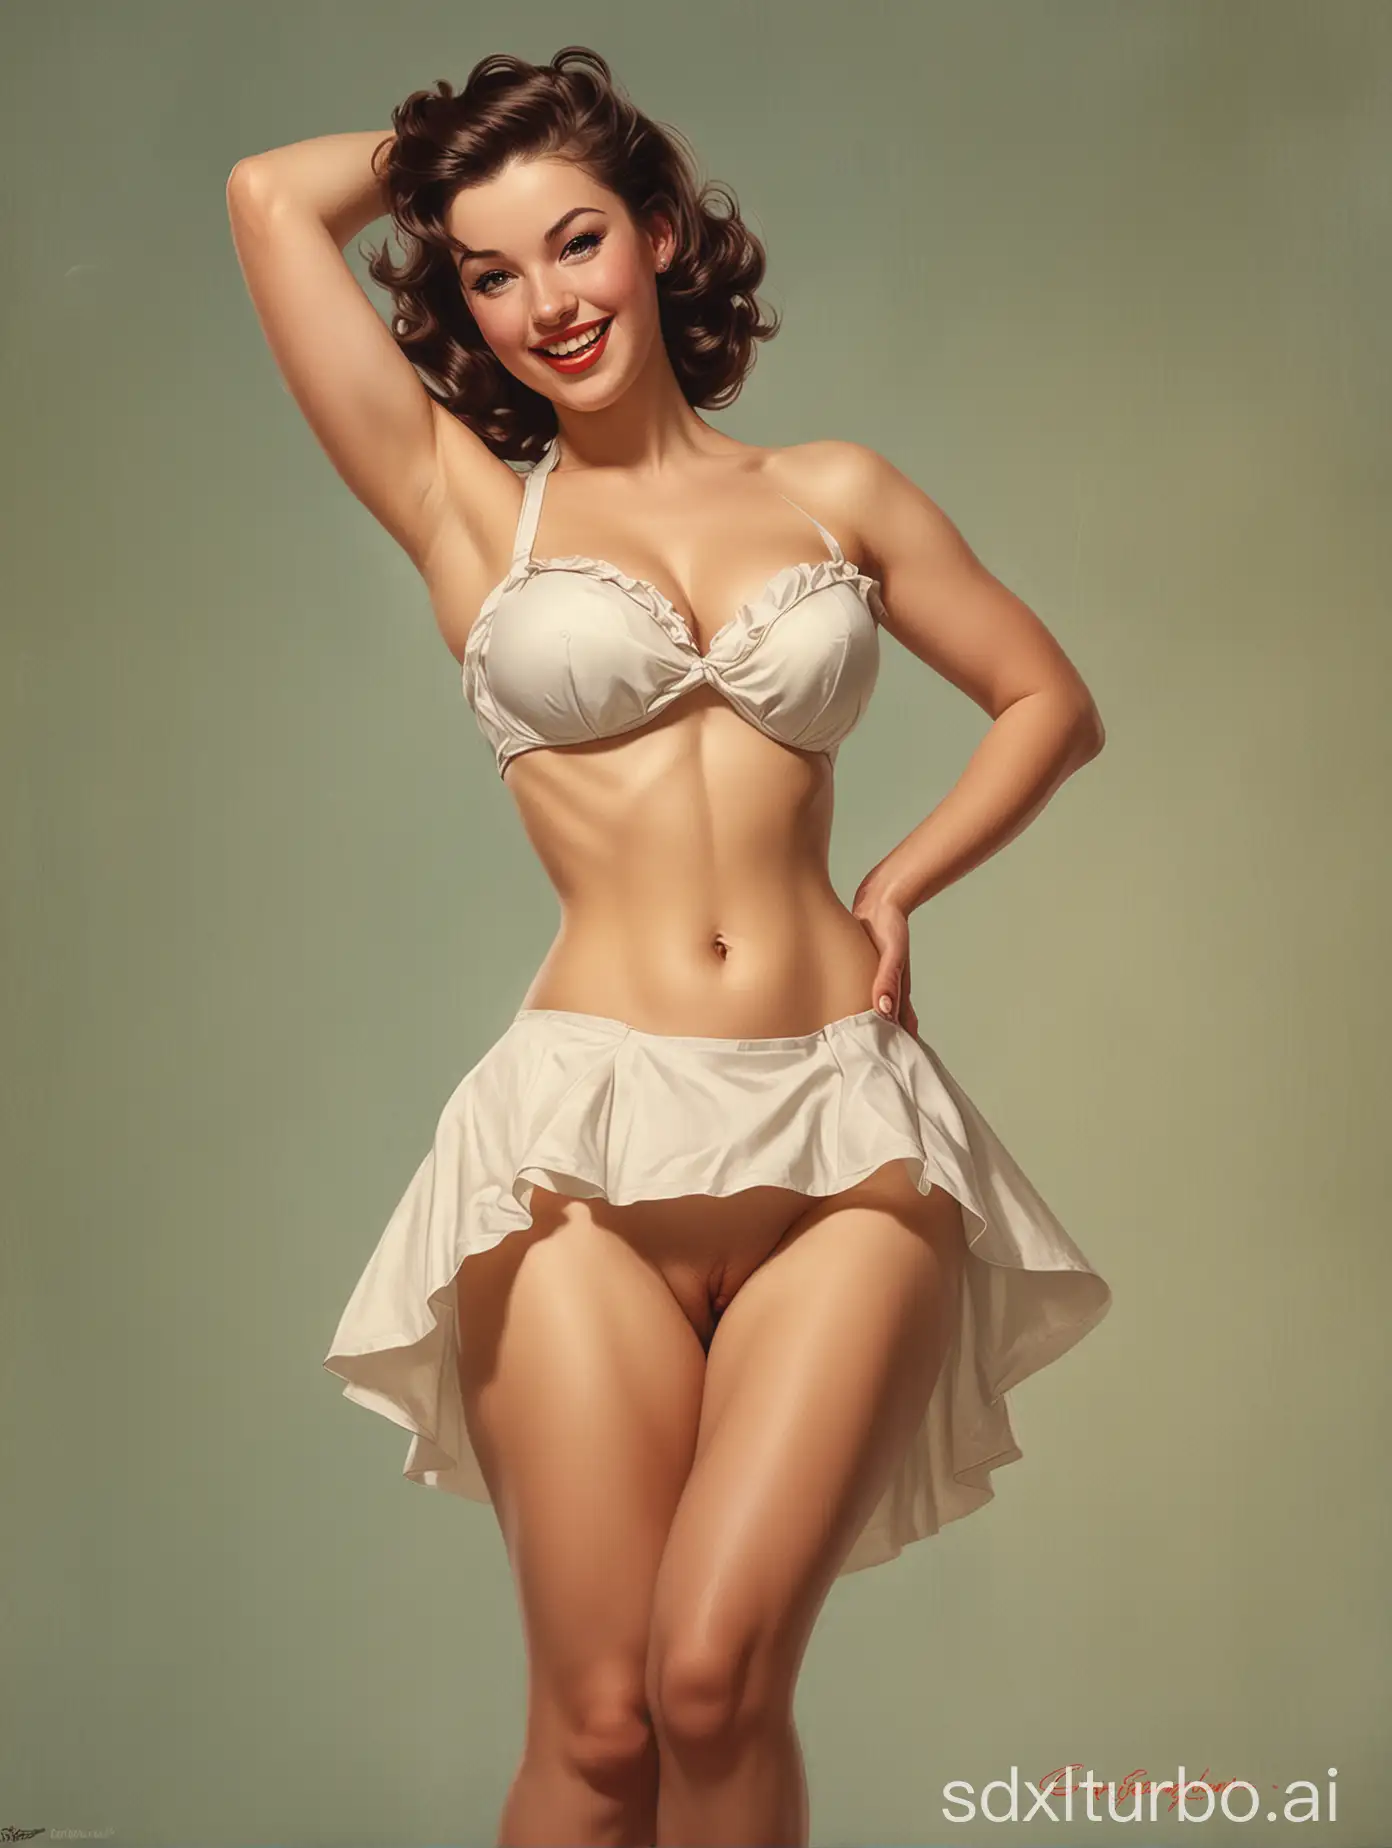 upshot, nude upskirt view of a woman,a gil elvgren style painting ,  high resolution: artgerm,  pin up style poster, idealised, smiling , sexy